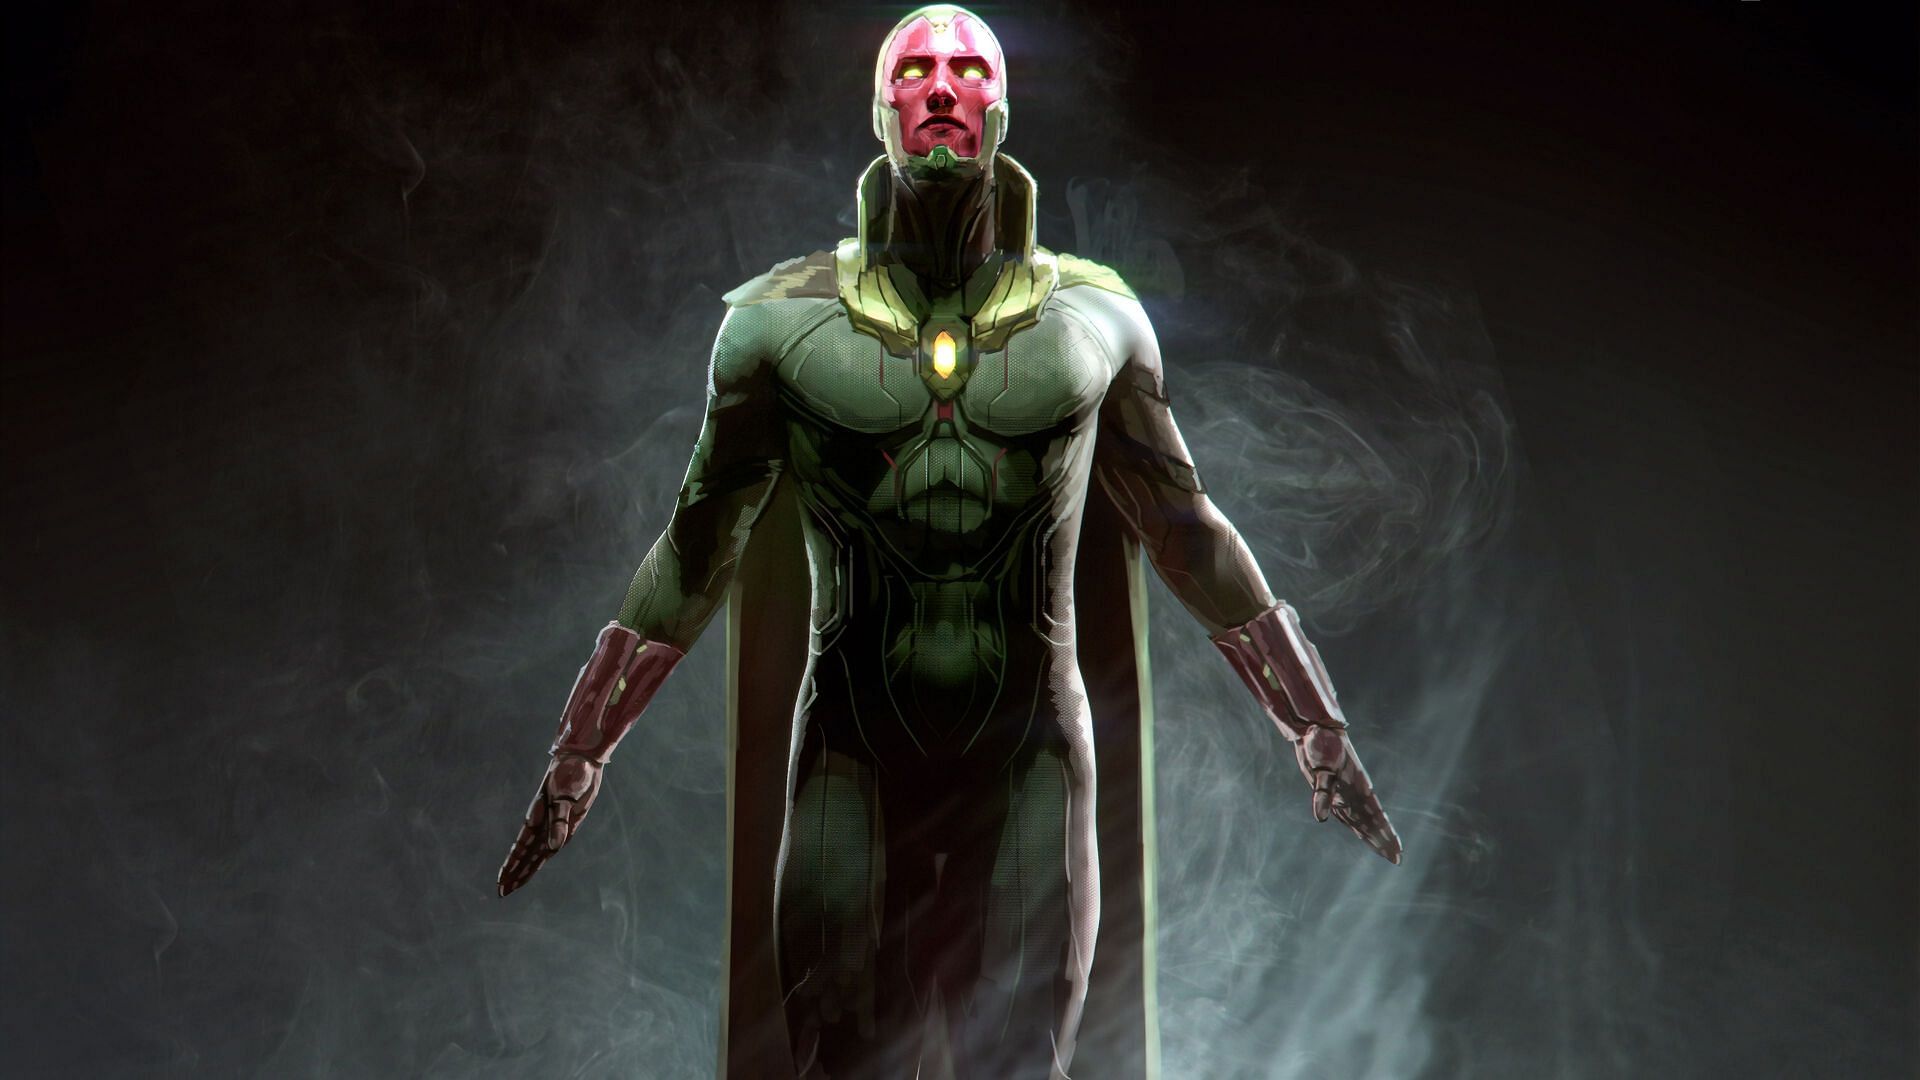 What makes Vision all the more amazing is his super-smart artificial brain. (Image via Marvel)